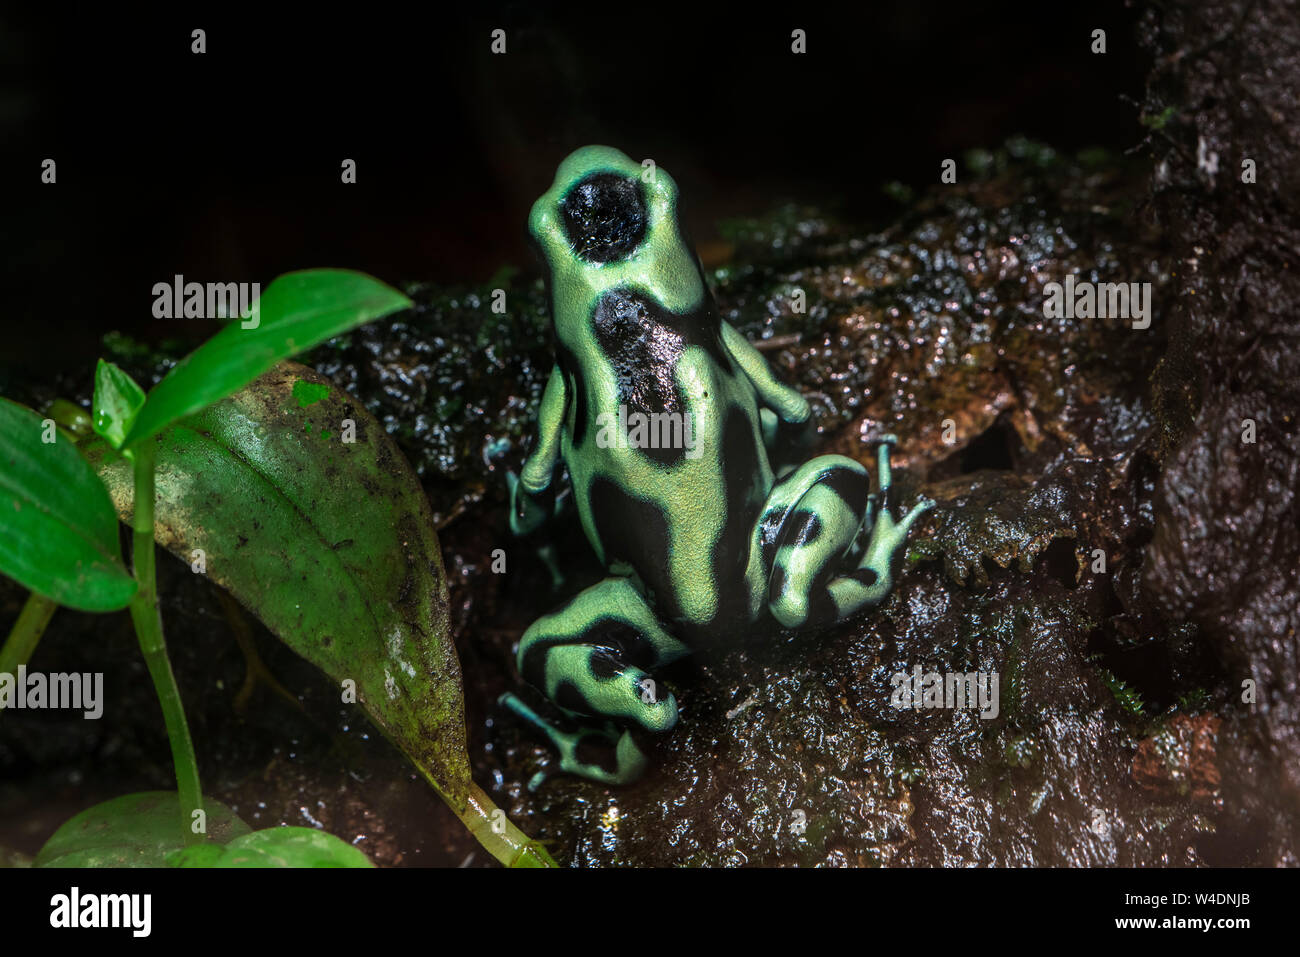 Green-and-black poison dart frog / green-and-black poison arrow frog (Dendrobates auratus / Phyllobates auratus) native to Central and South America Stock Photo